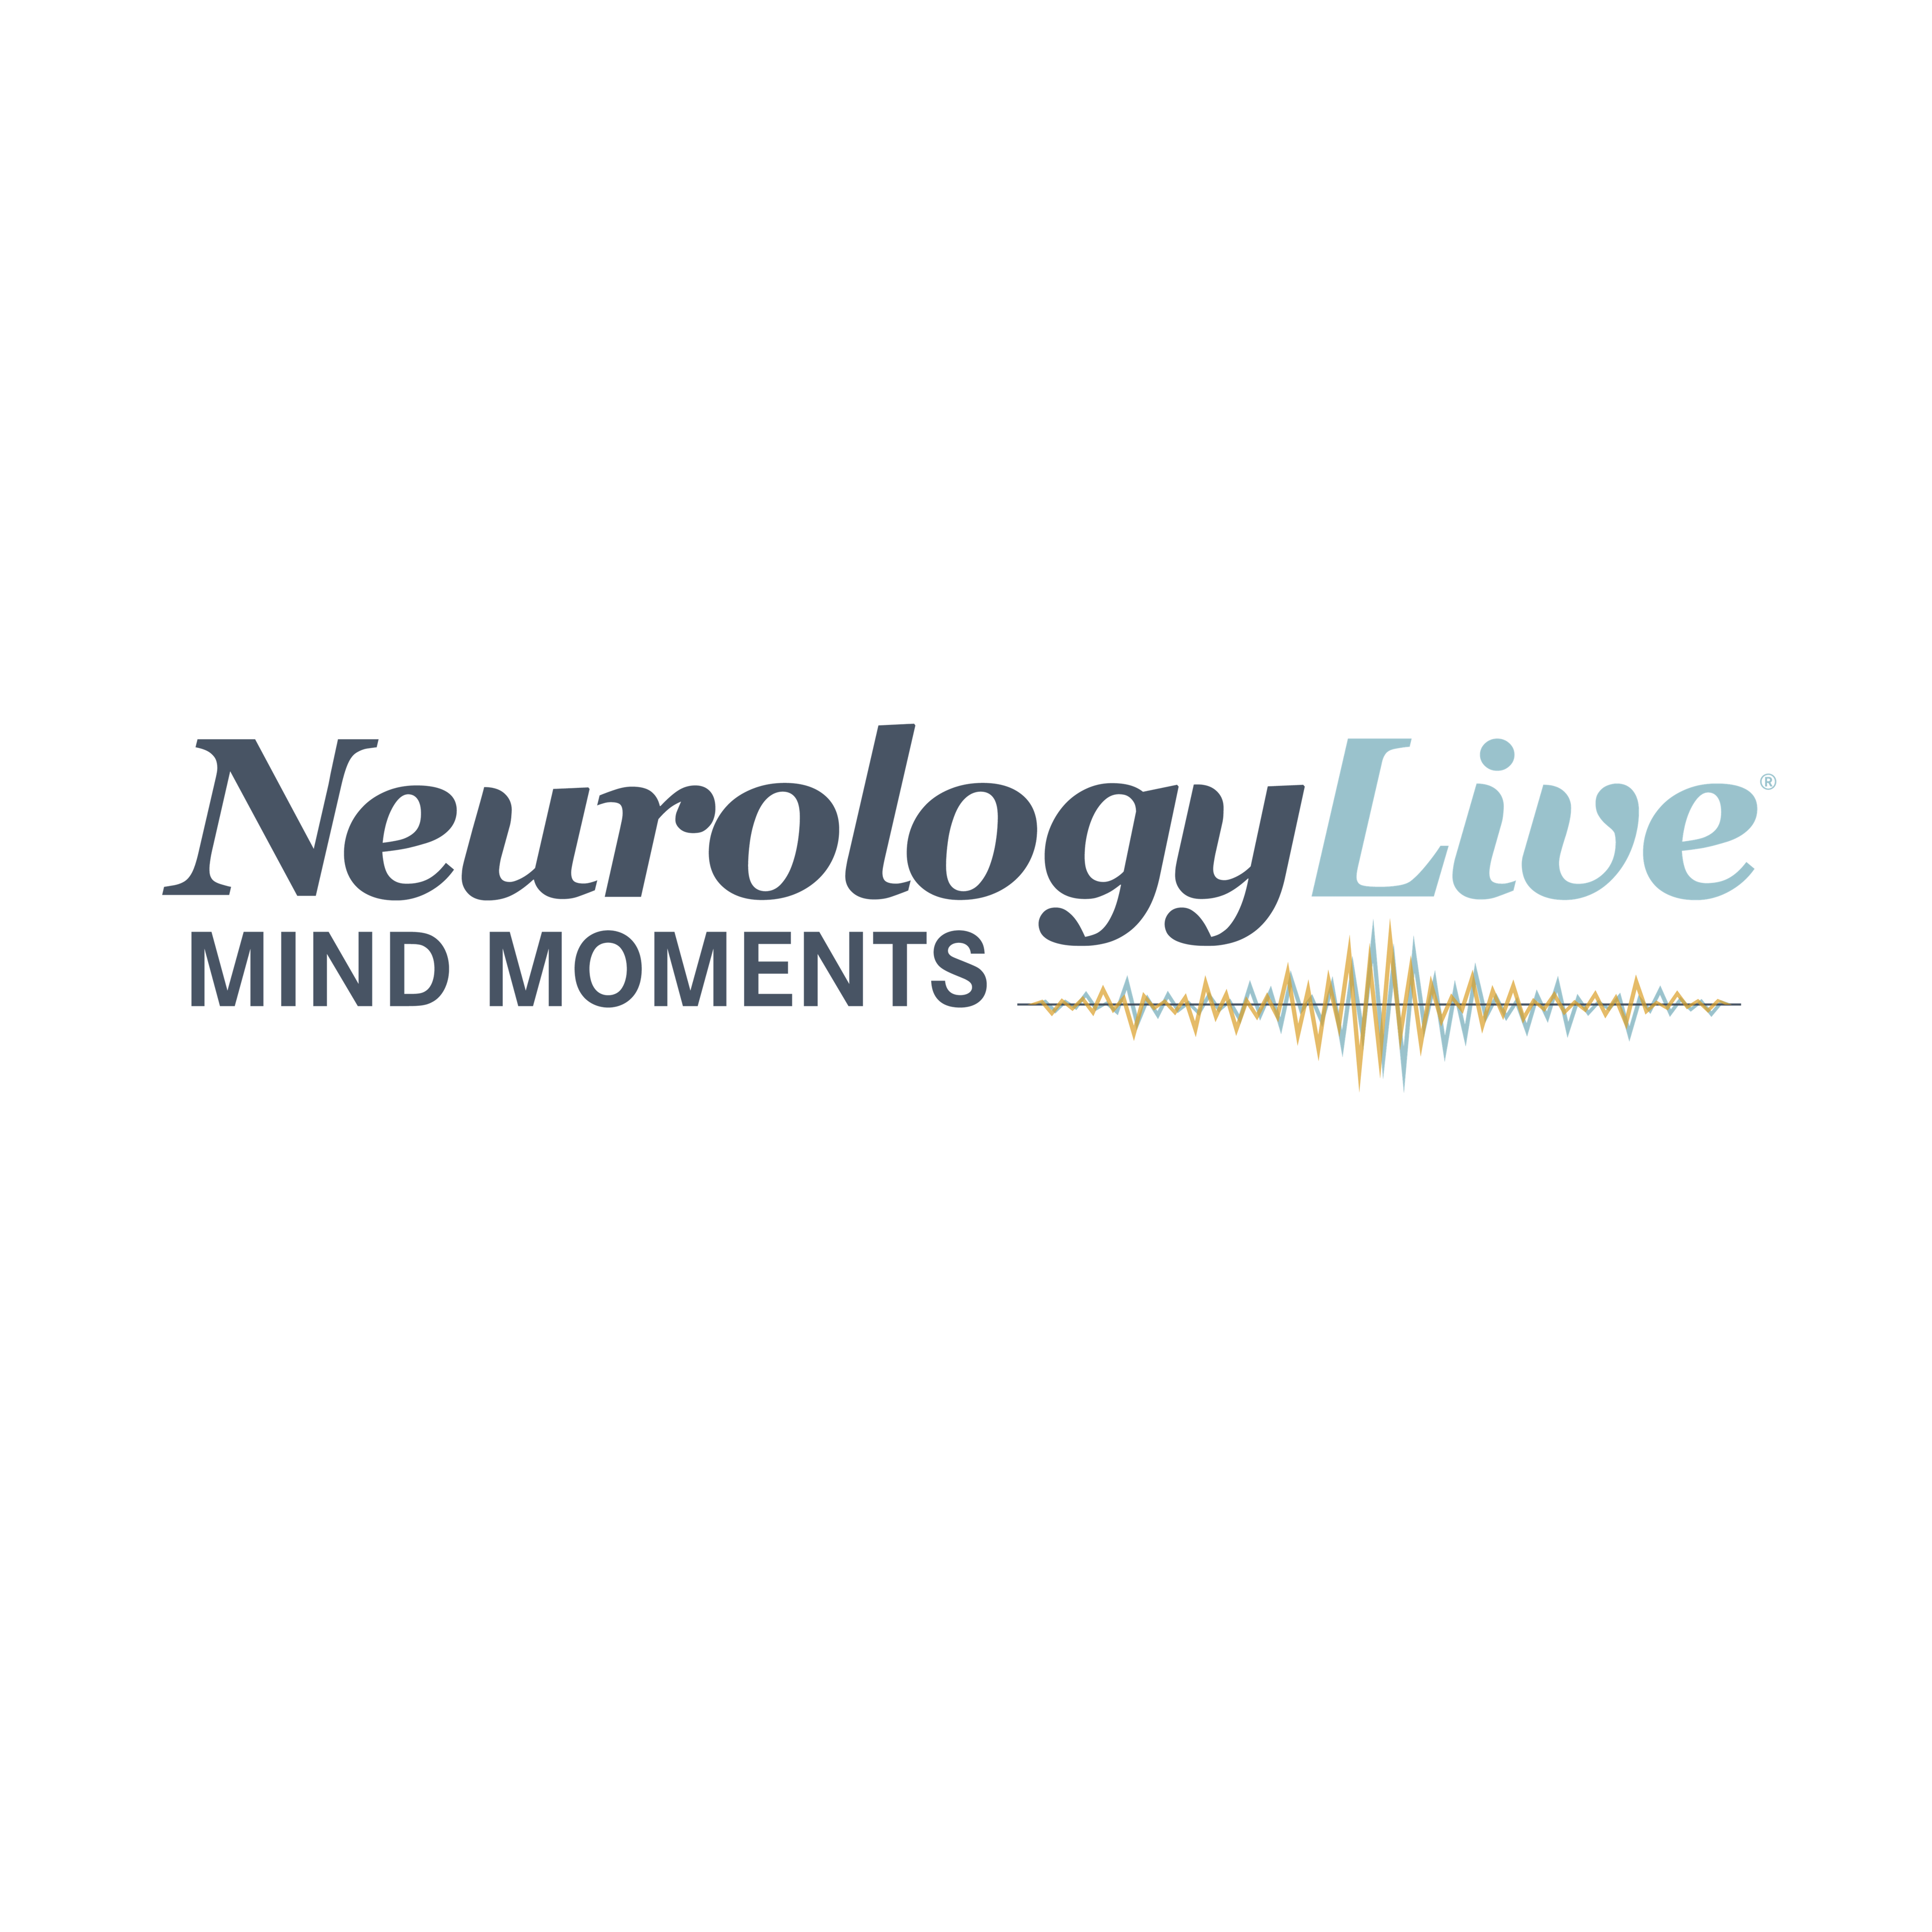 Episode 18: Preventing Tonic-Clonic Seizures in Refractory Epilepsy